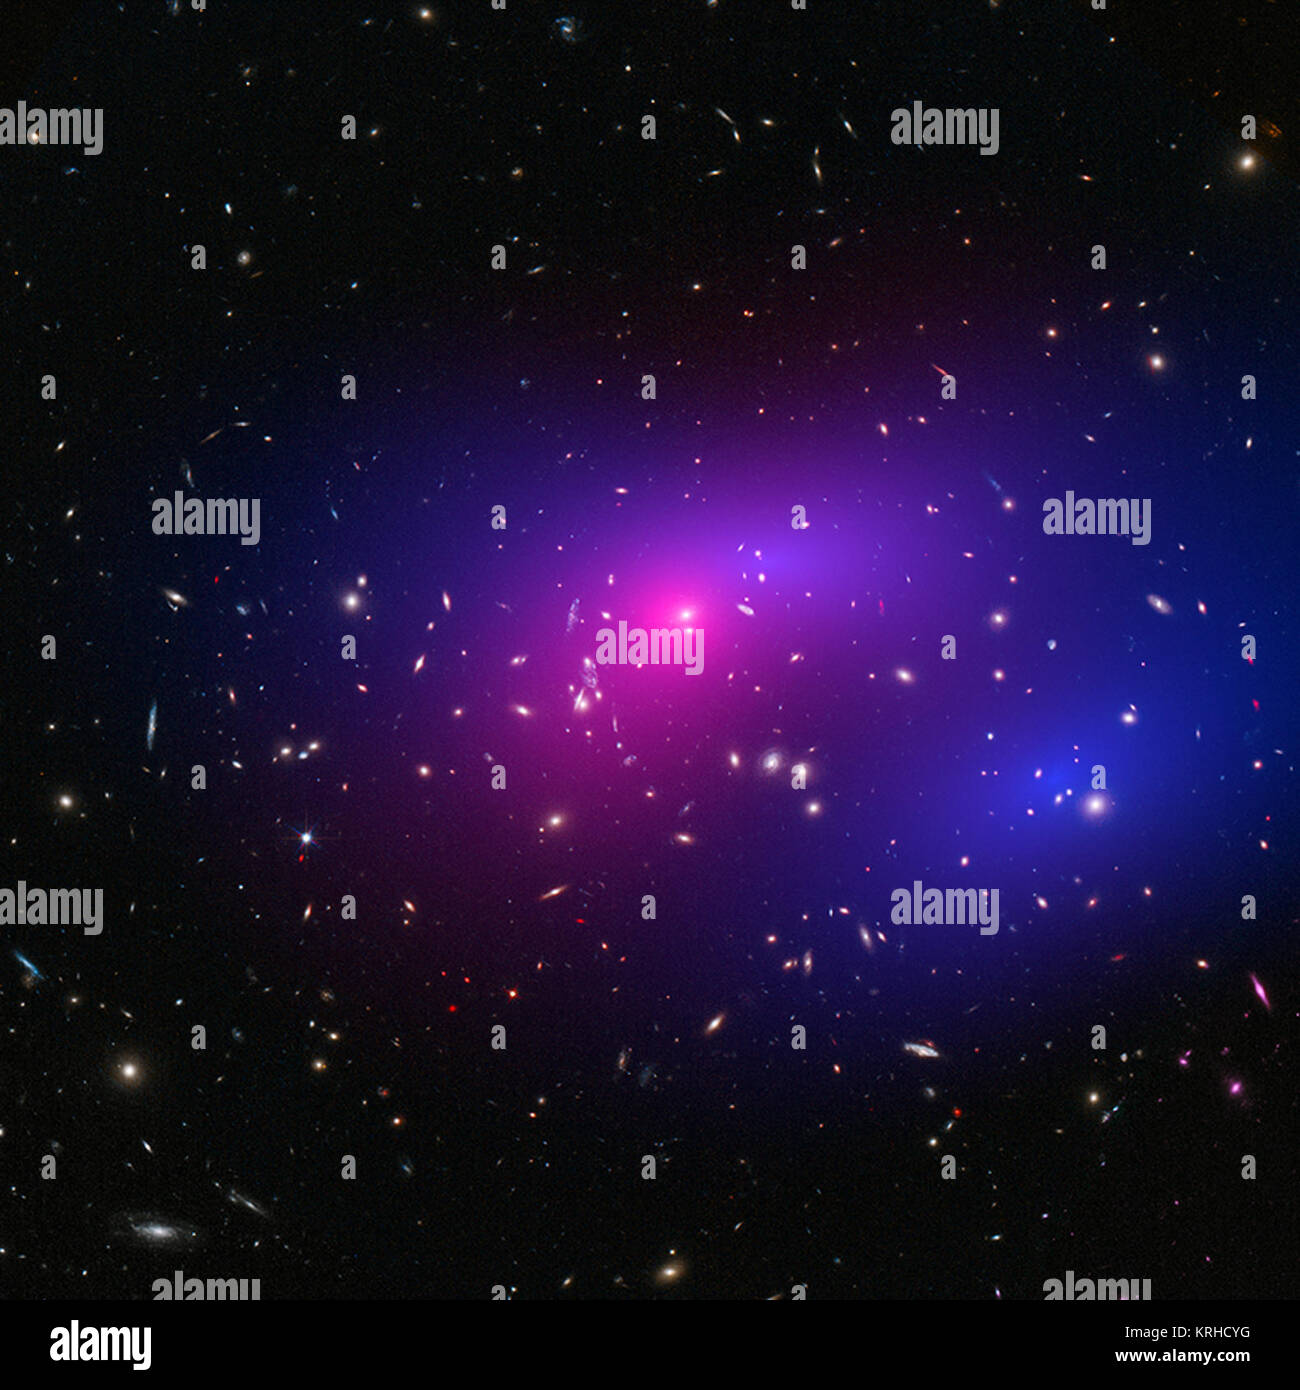 These galaxy clusters are part of a large study using Chandra and Hubble that sets new limits on how dark matter - the mysterious substance that makes up most of the matter in the Universe - interacts with itself. The hot gas that envelopes the clusters glows brightly in X-rays detected by Chandra (pink). When combined with Hubble's visible light data, astronomers can map where the stars and hot gas are after the collision, as well as the inferred distribution of dark matter (blue) through the effect of gravitational lensing. MACS J0152.5-2852 (HST & Chandra) dark macsj0152 Stock Photo